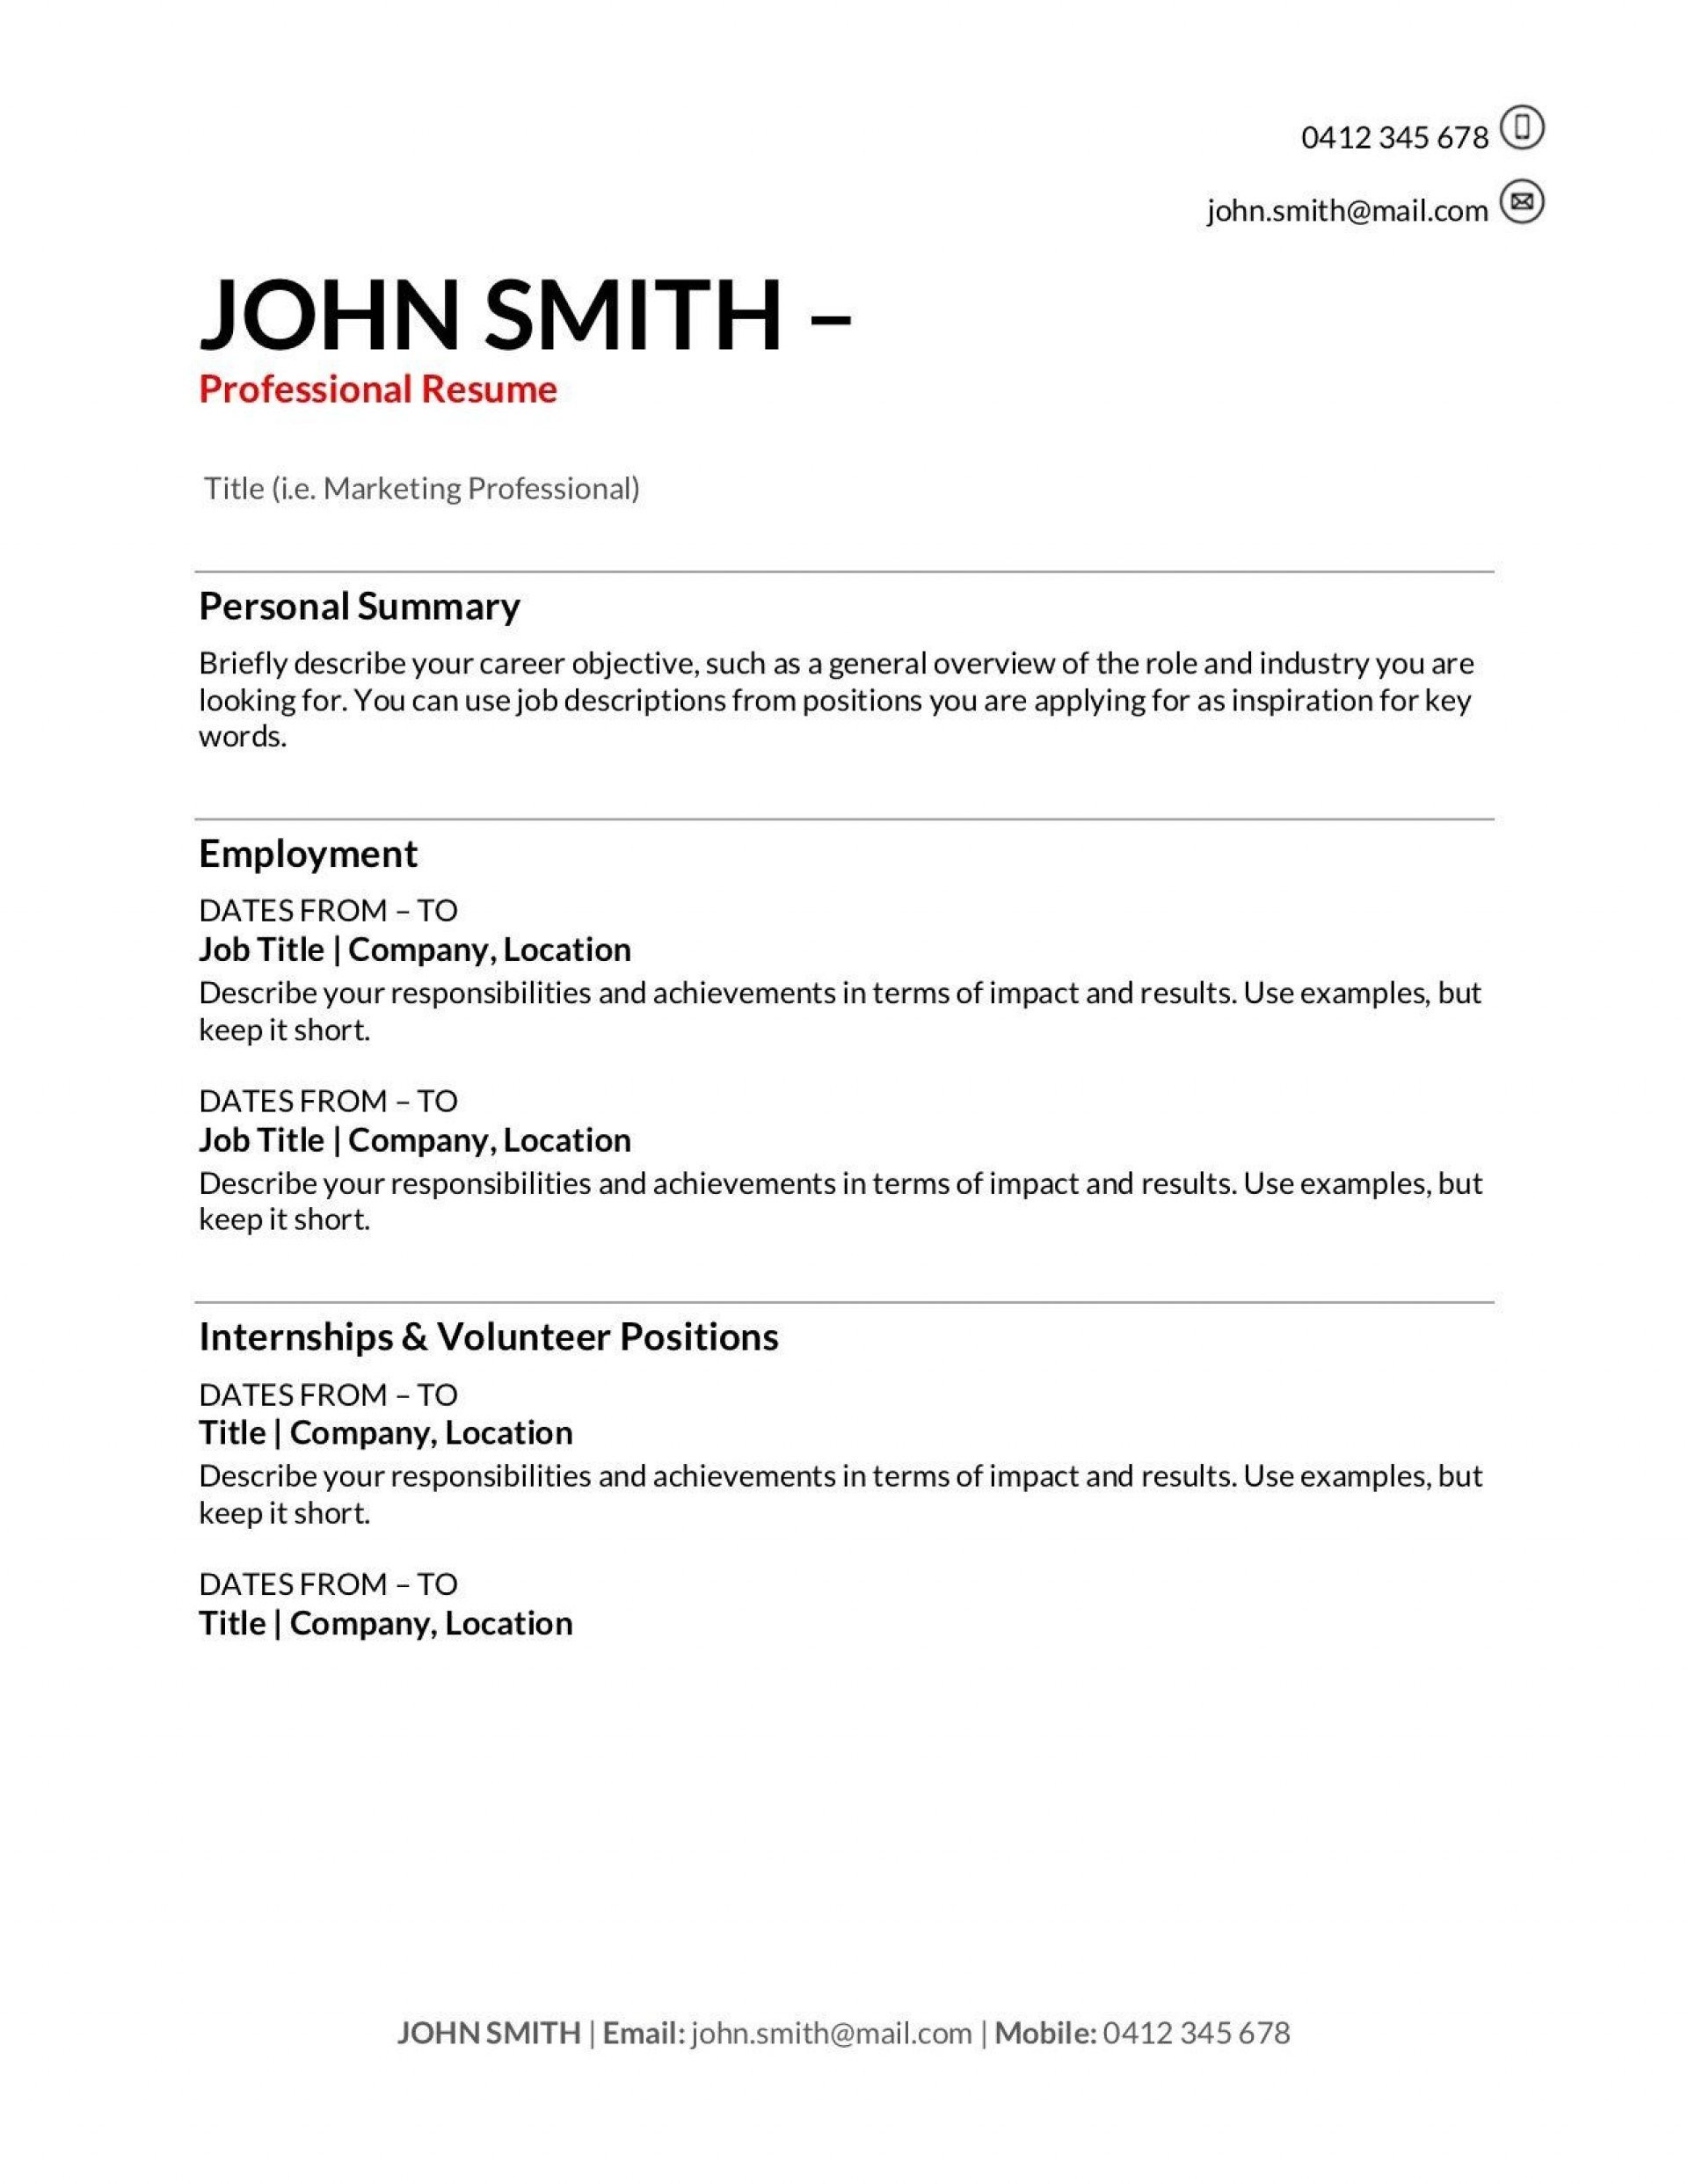 First Job Resume No Experience Template How to Make A Resume for Your First Job – Master Your Resume